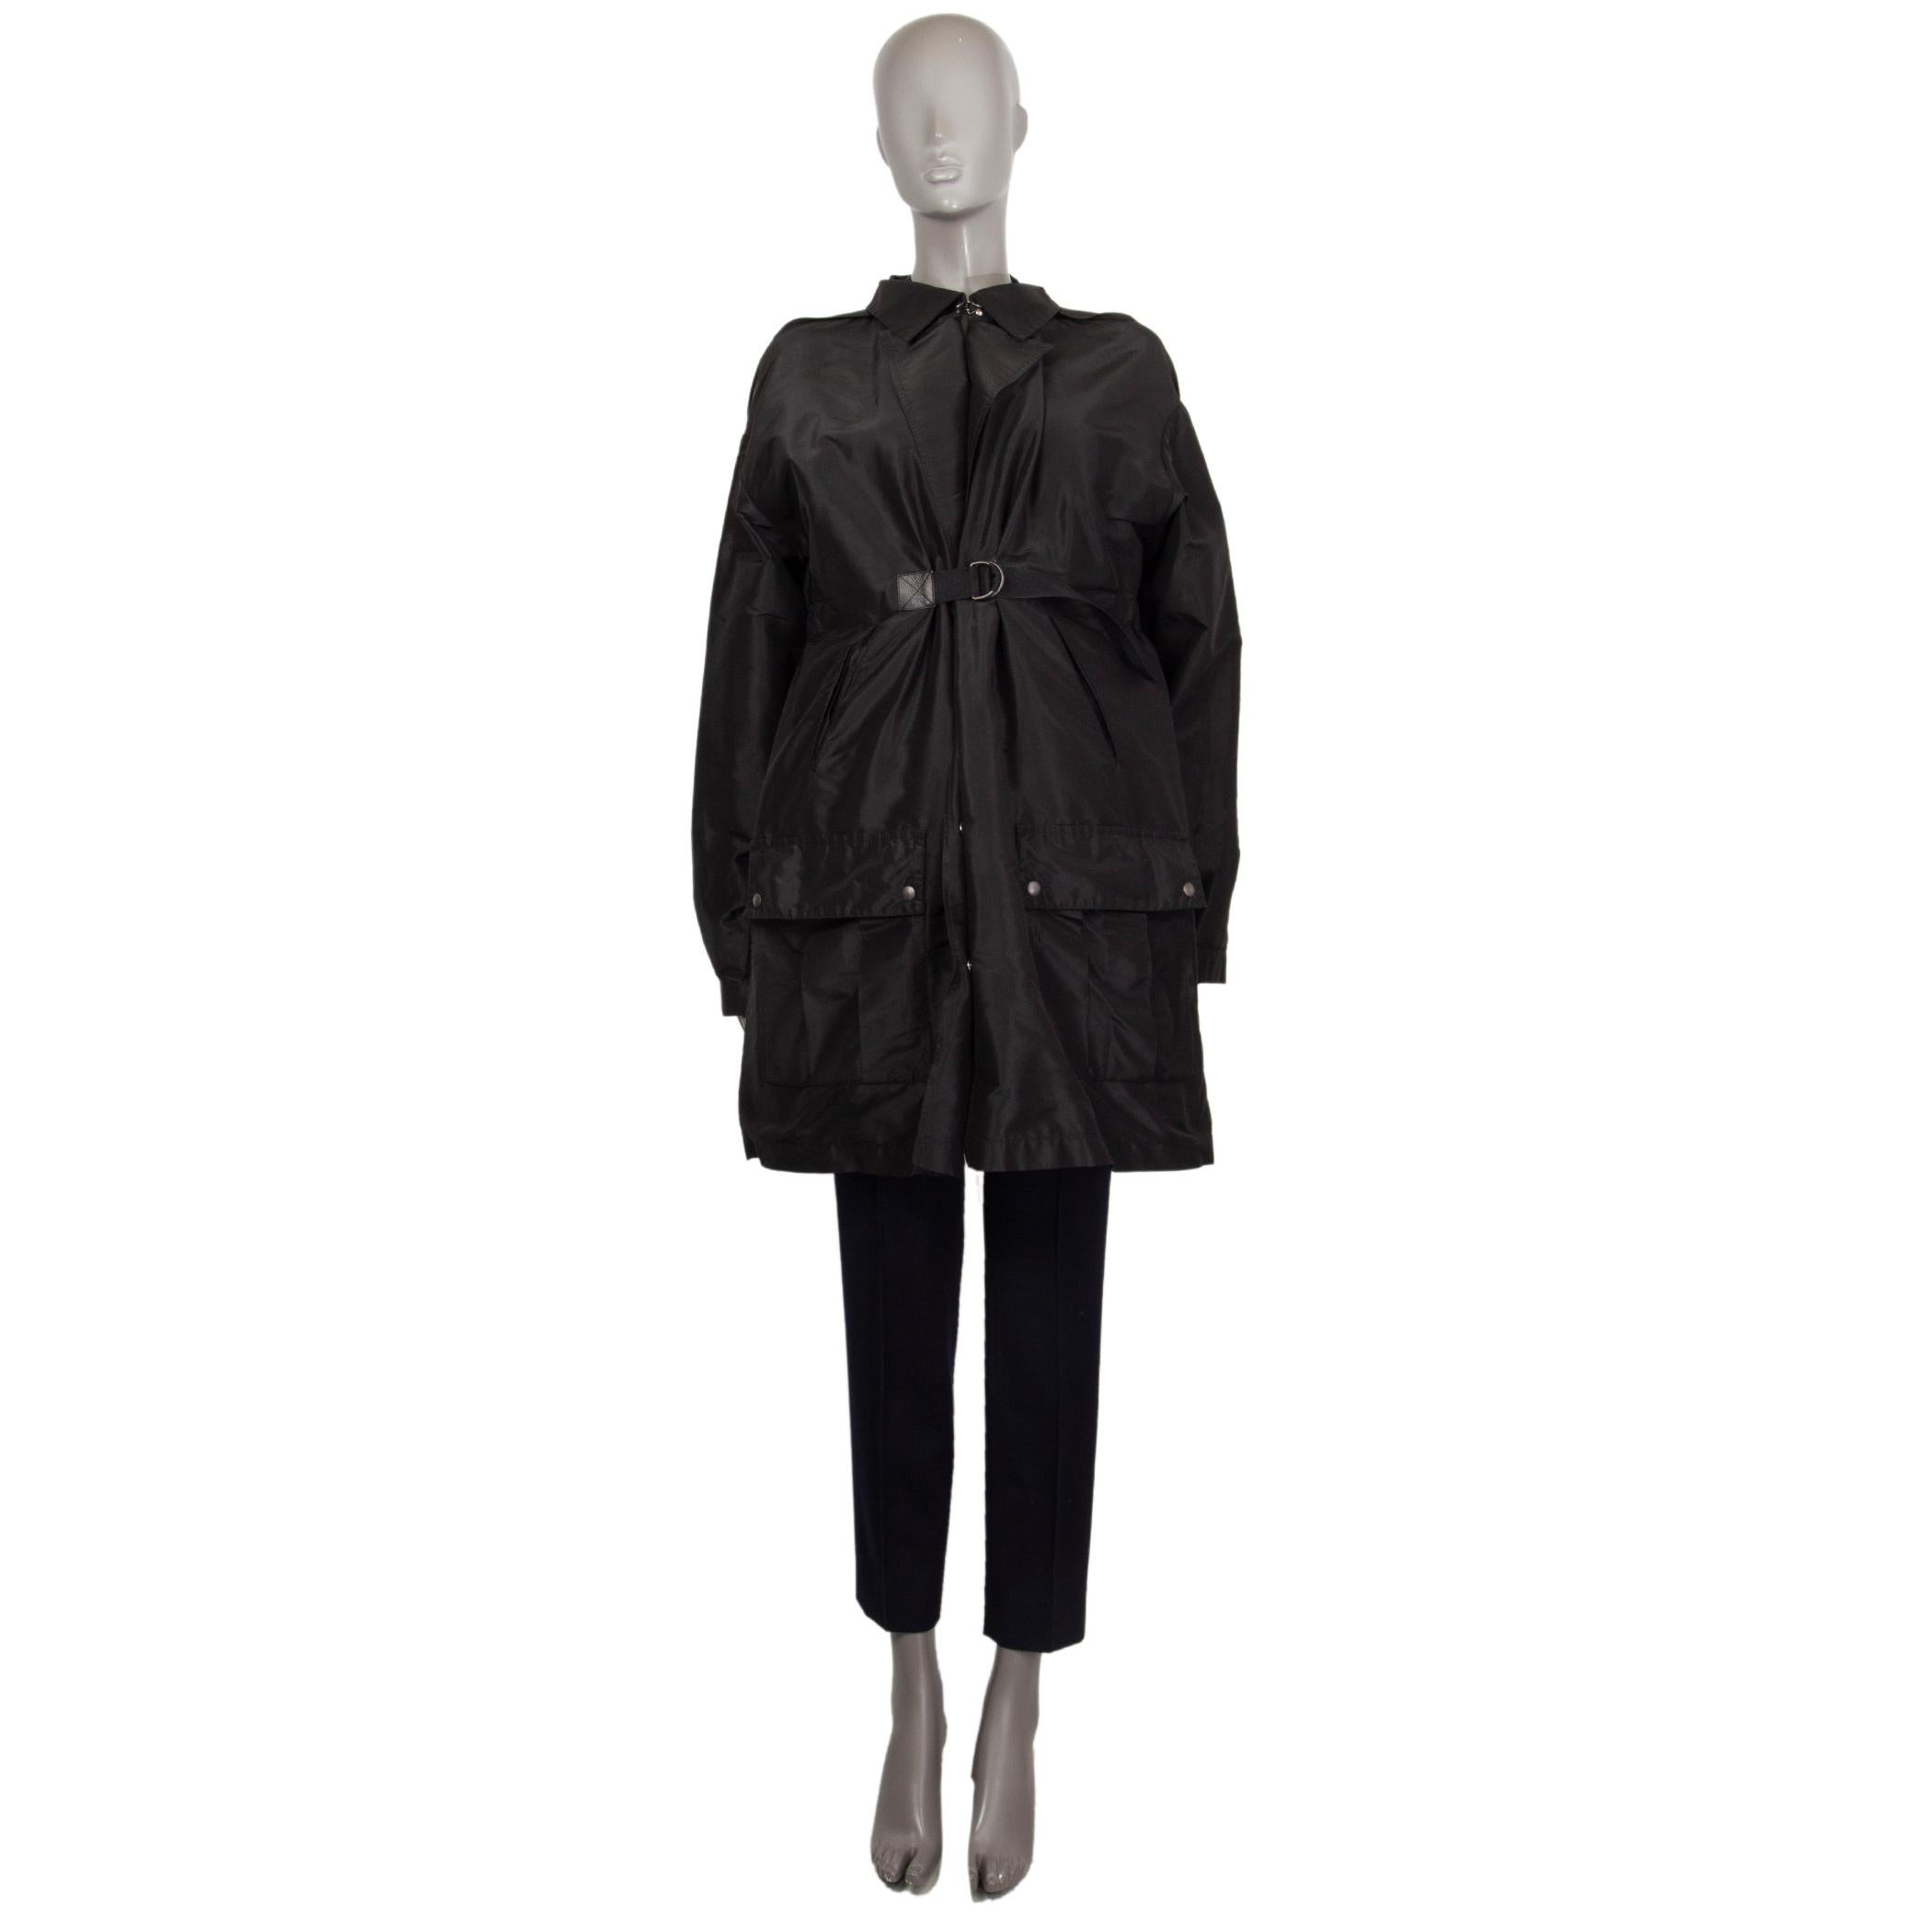 authentic Bottega Veneta coat in black silk (100%) with a leather detail adjustable buckle on the front, two front slit pockets and two large frontal pockets. Closes on the front with snap buttons and its cuffs close with a zipper and a snap button.